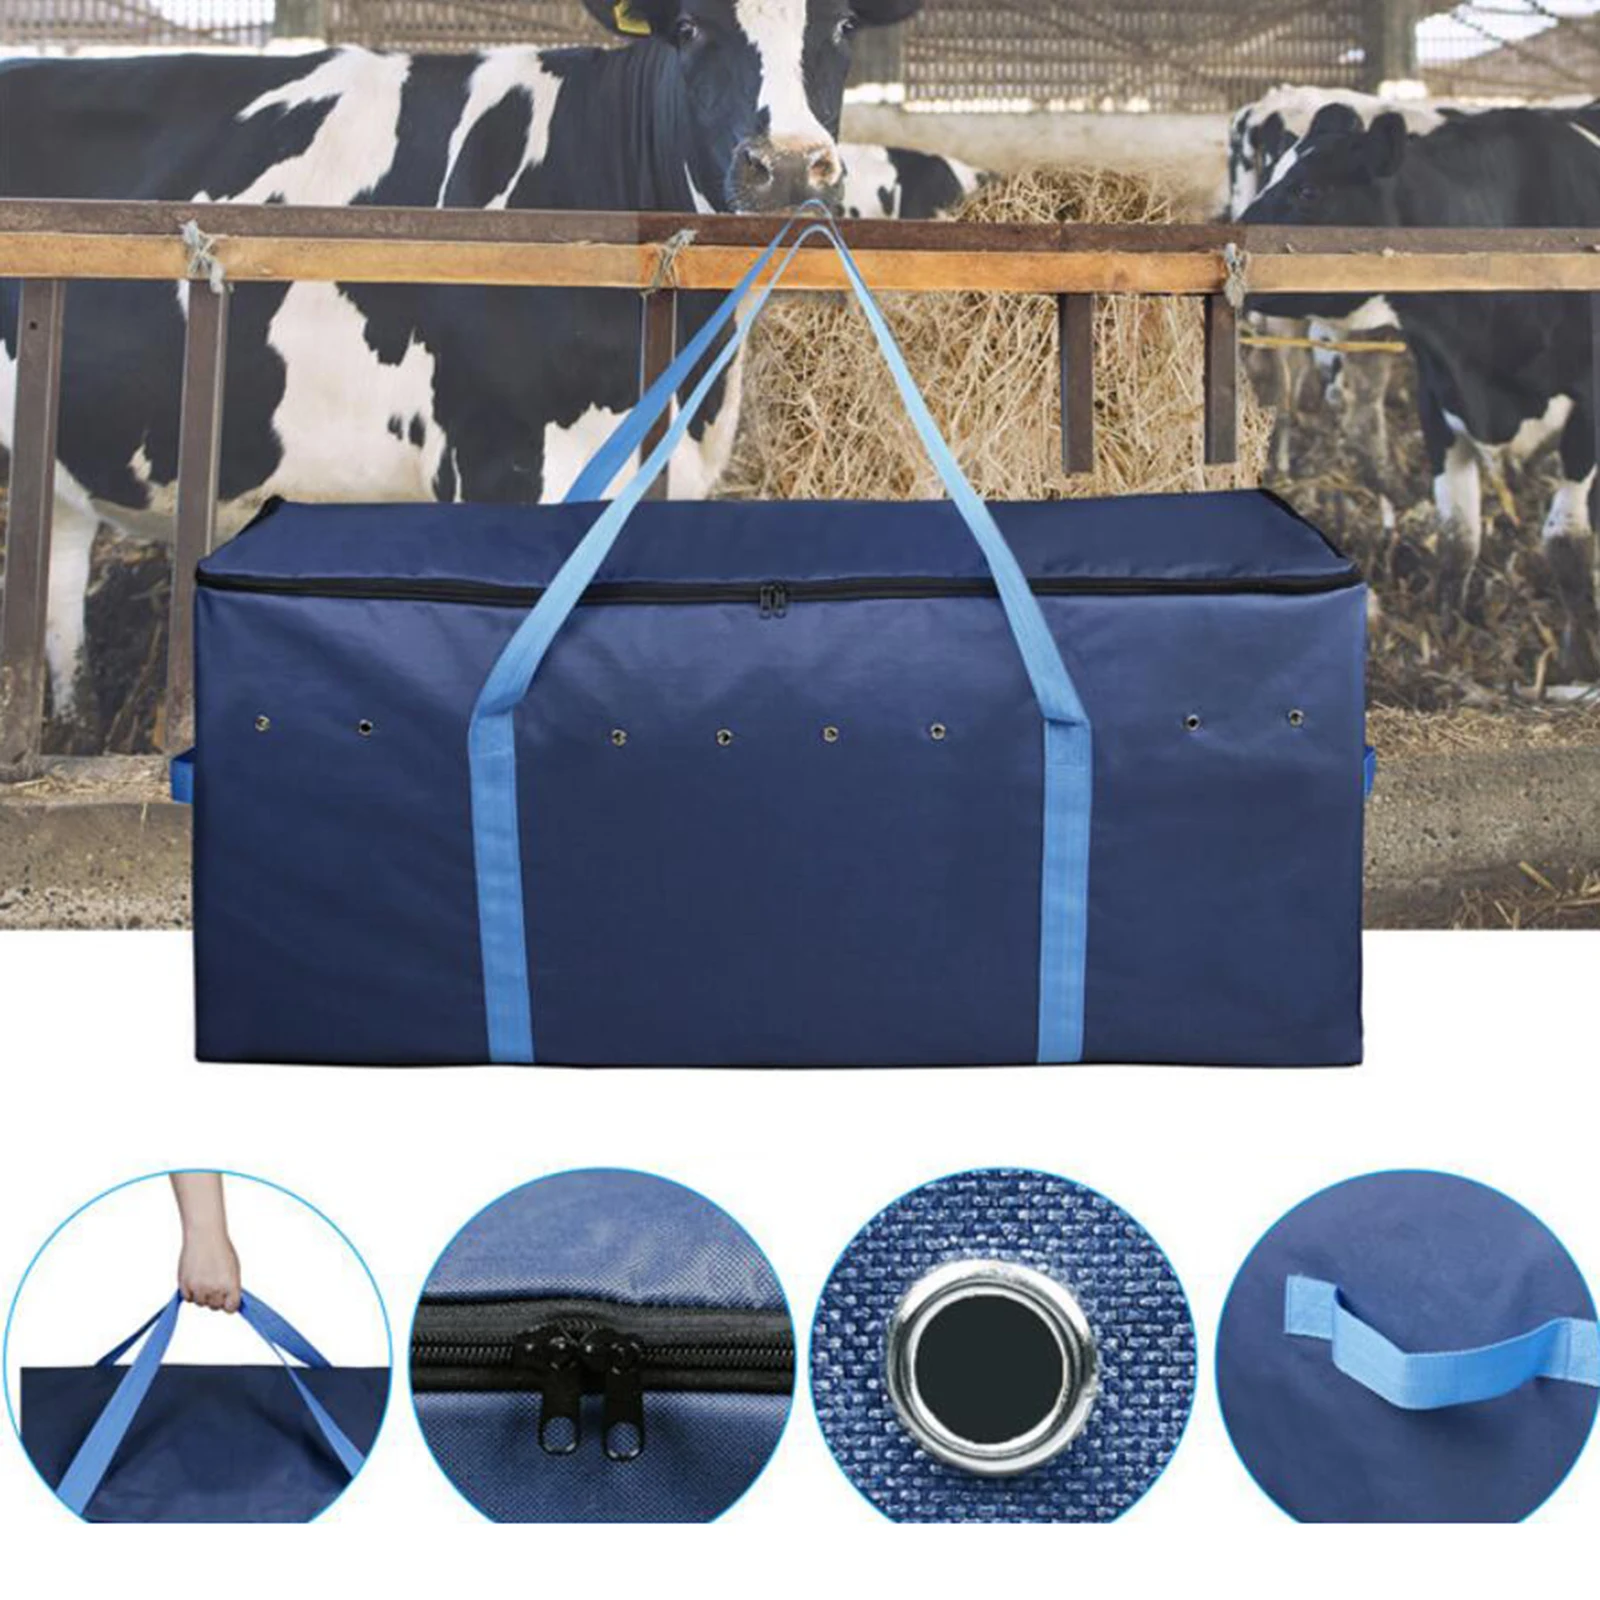 Foldable Large Hay Bale Carry Bag Zipper Tote 600D Oxford Cloth Waterproof